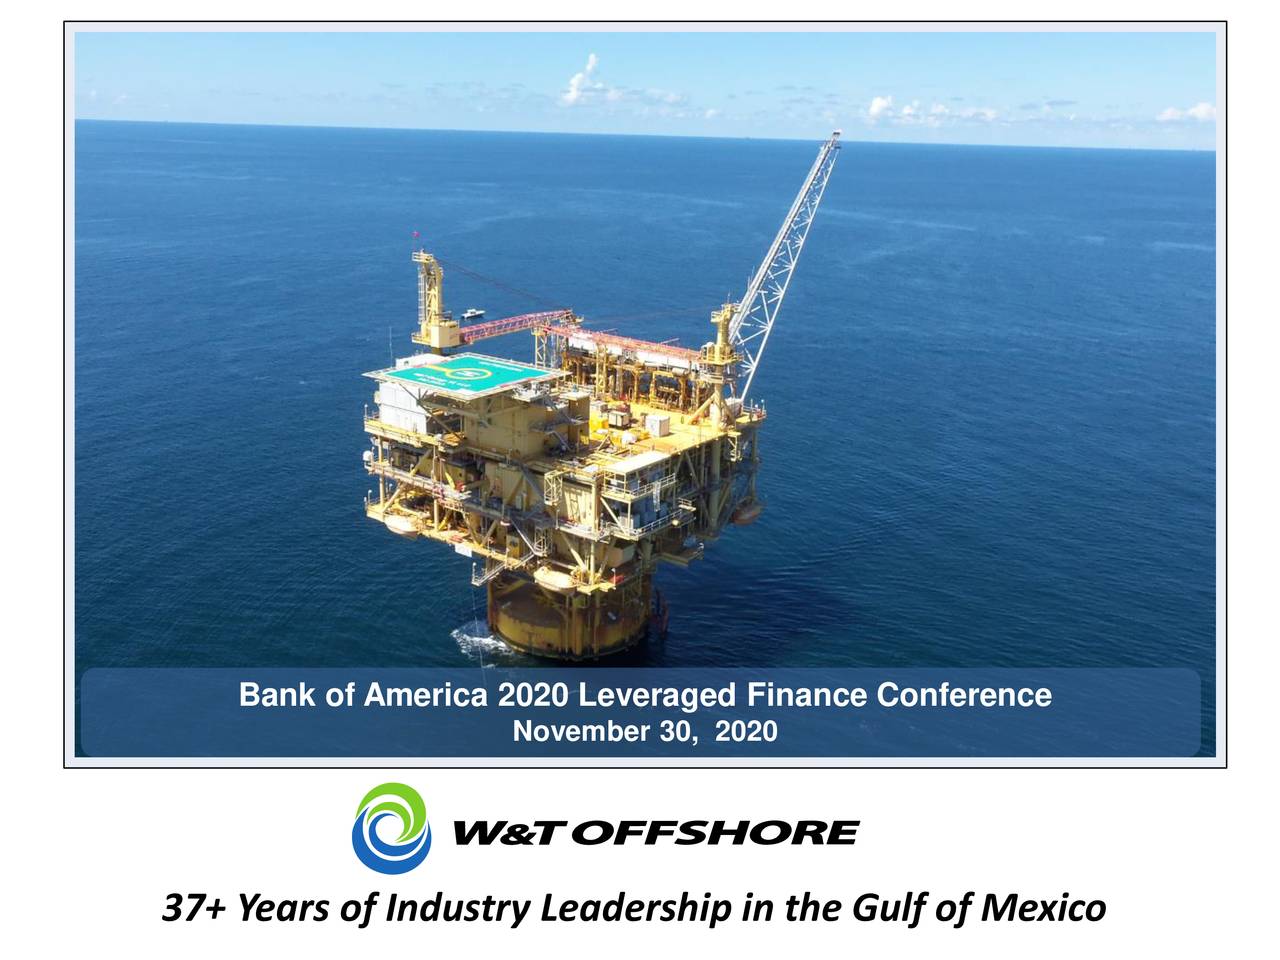 W&T Offshore (WTI) Presents At Bank of America 2020 Leveraged Finance